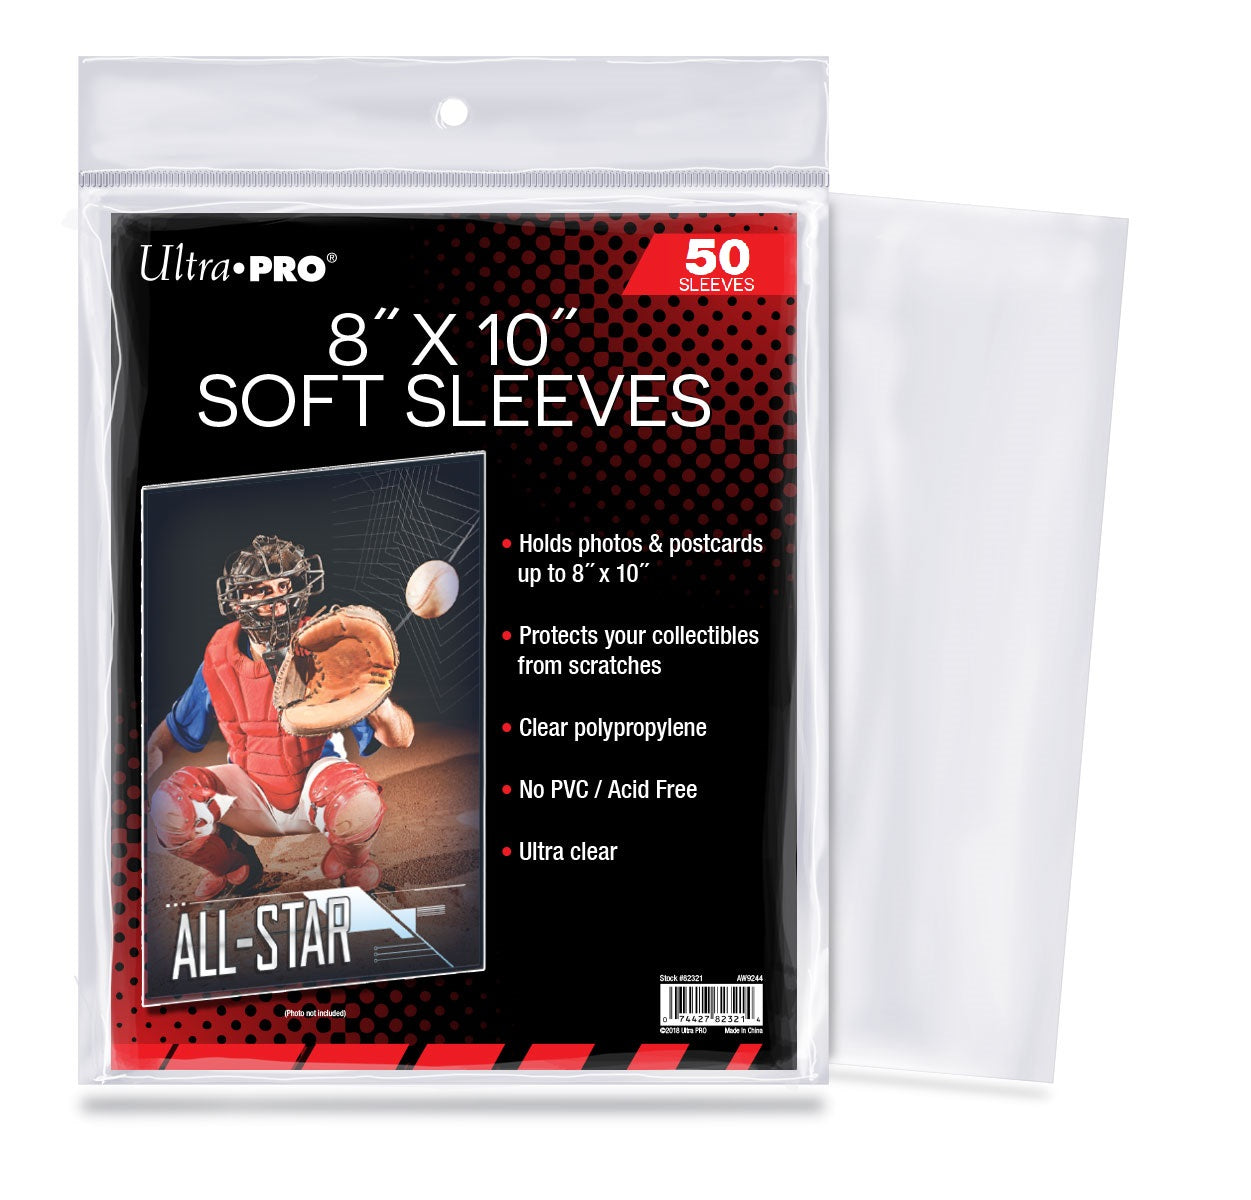 Ultra Pro 8" X 10" Soft Sleeves (Lot of 5) - BigBoi Cards